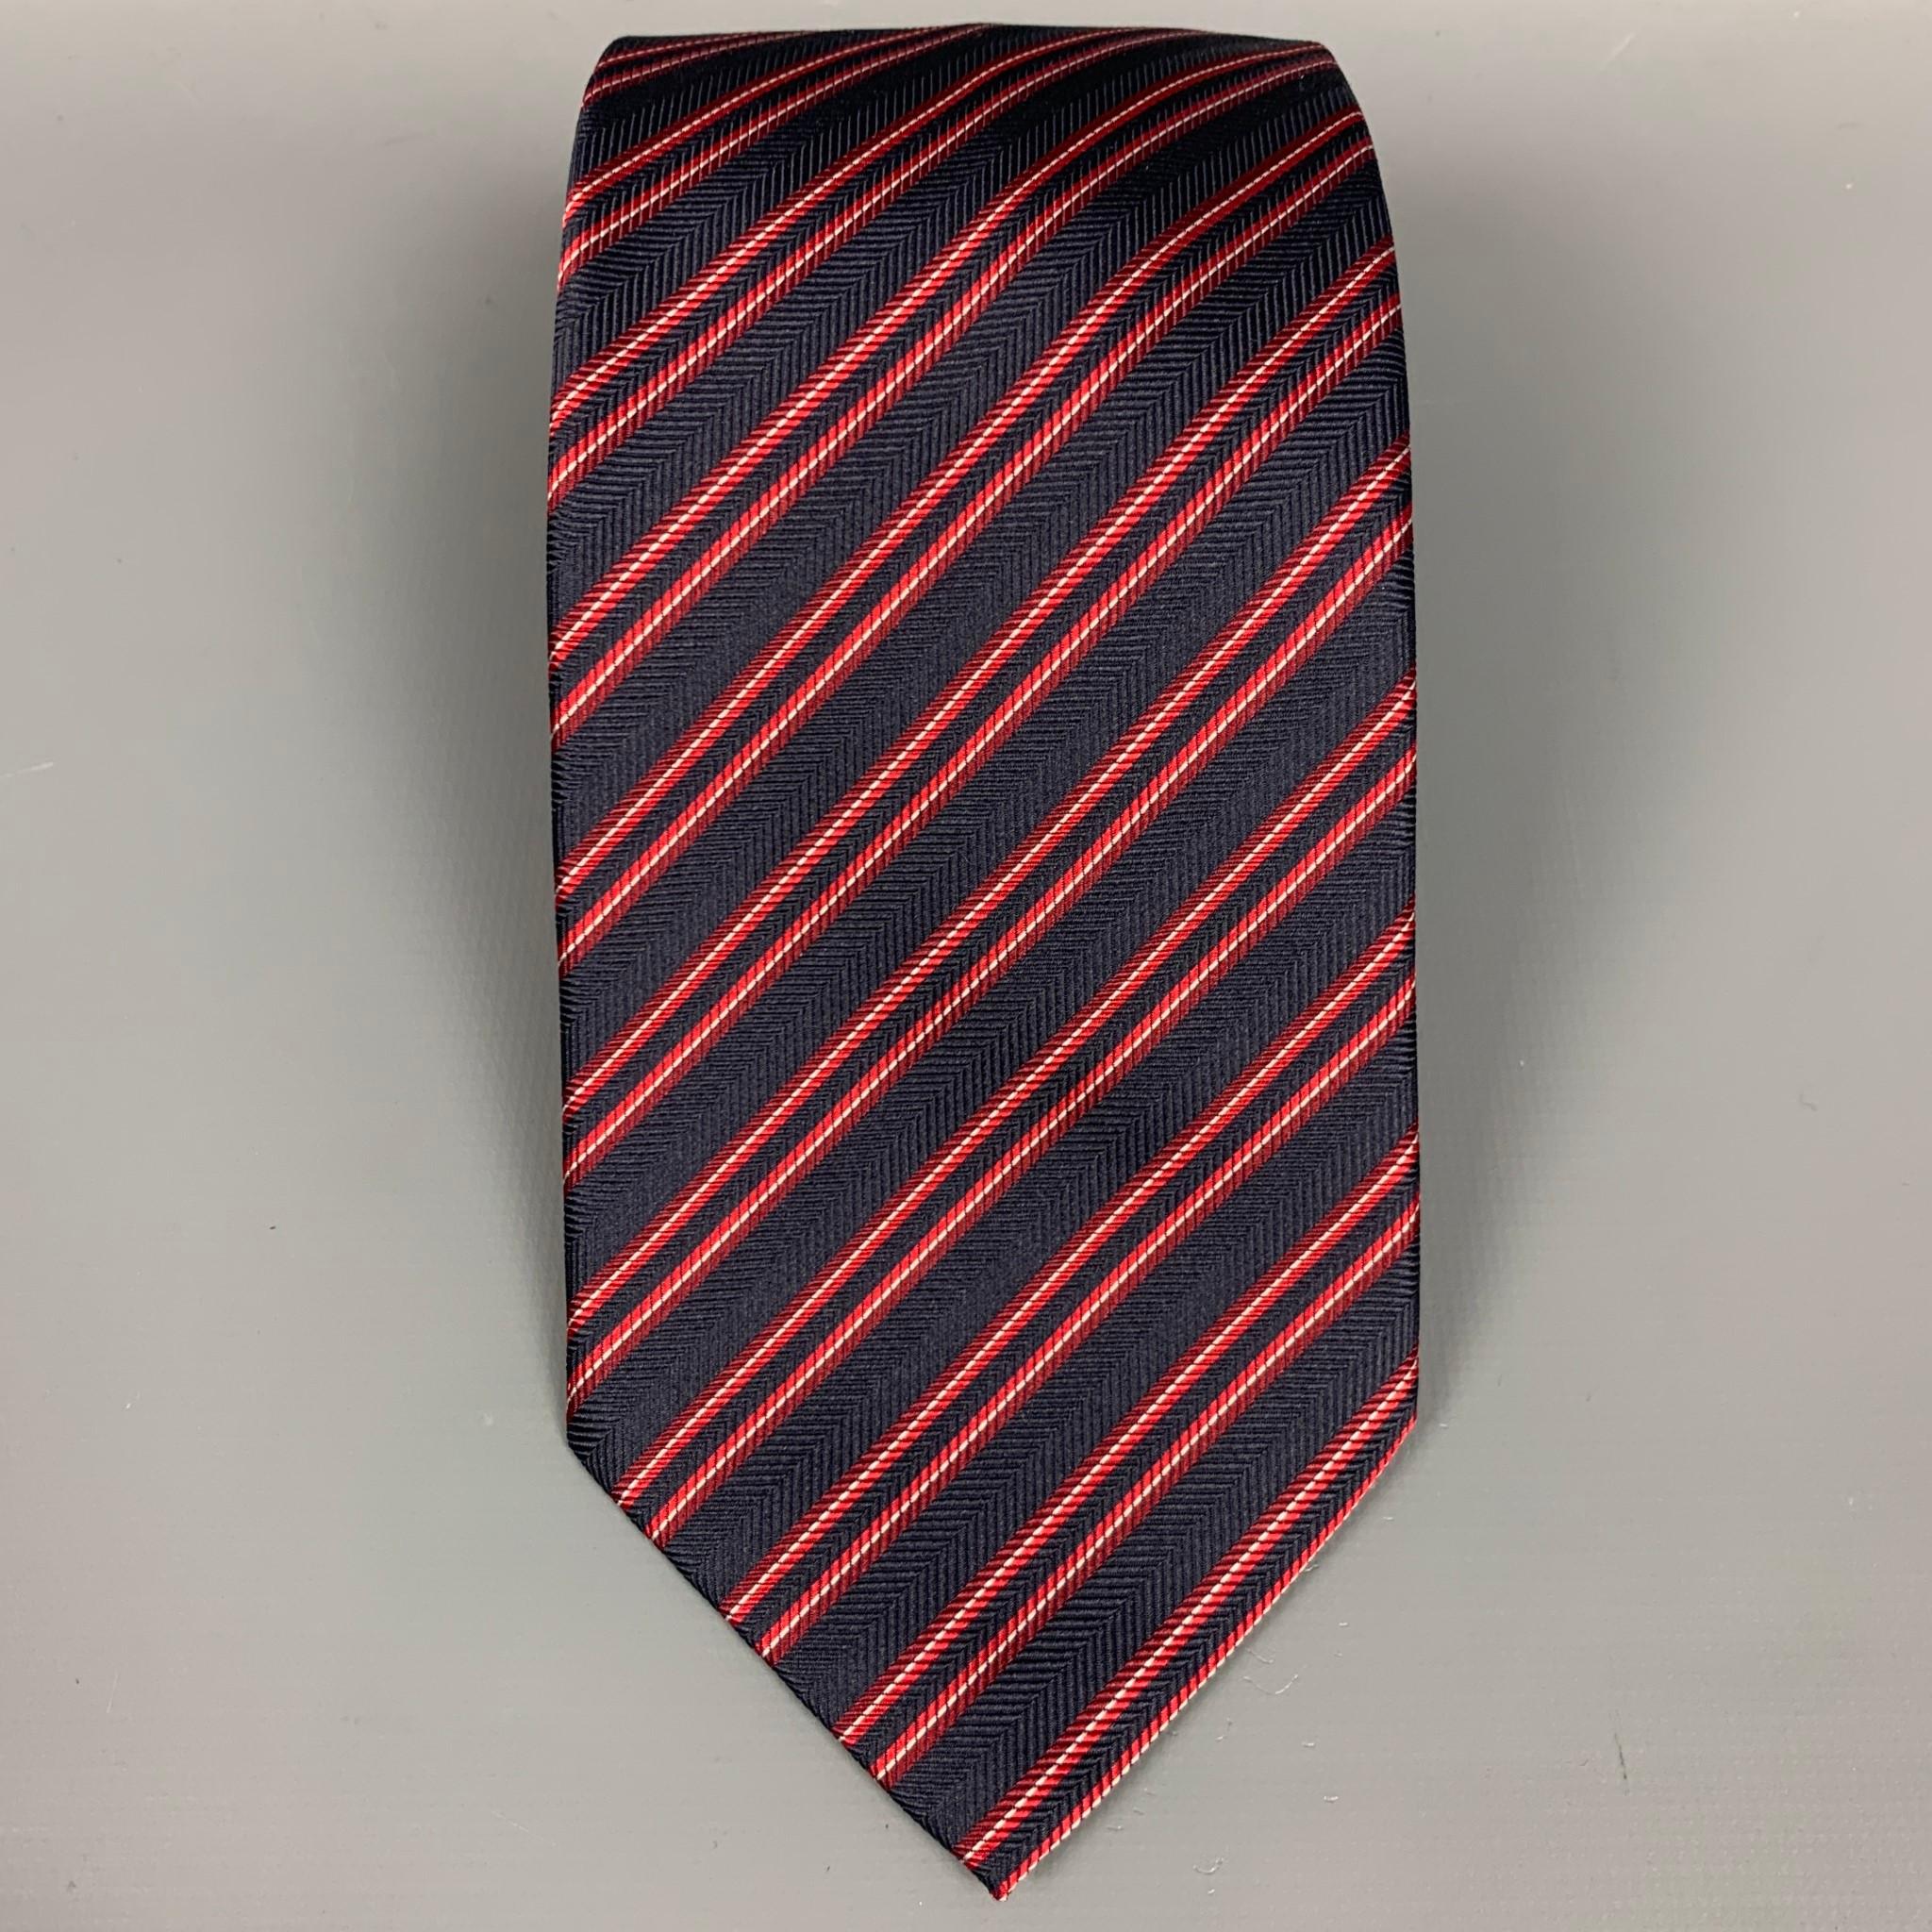 BRIONI neck tie comes in a navy & red stripe print silk. Made in Italy.

Very Good Pre-Owned Condition.

Measurements:
Marked: Dis. FST40

Width: 3.5 in.  